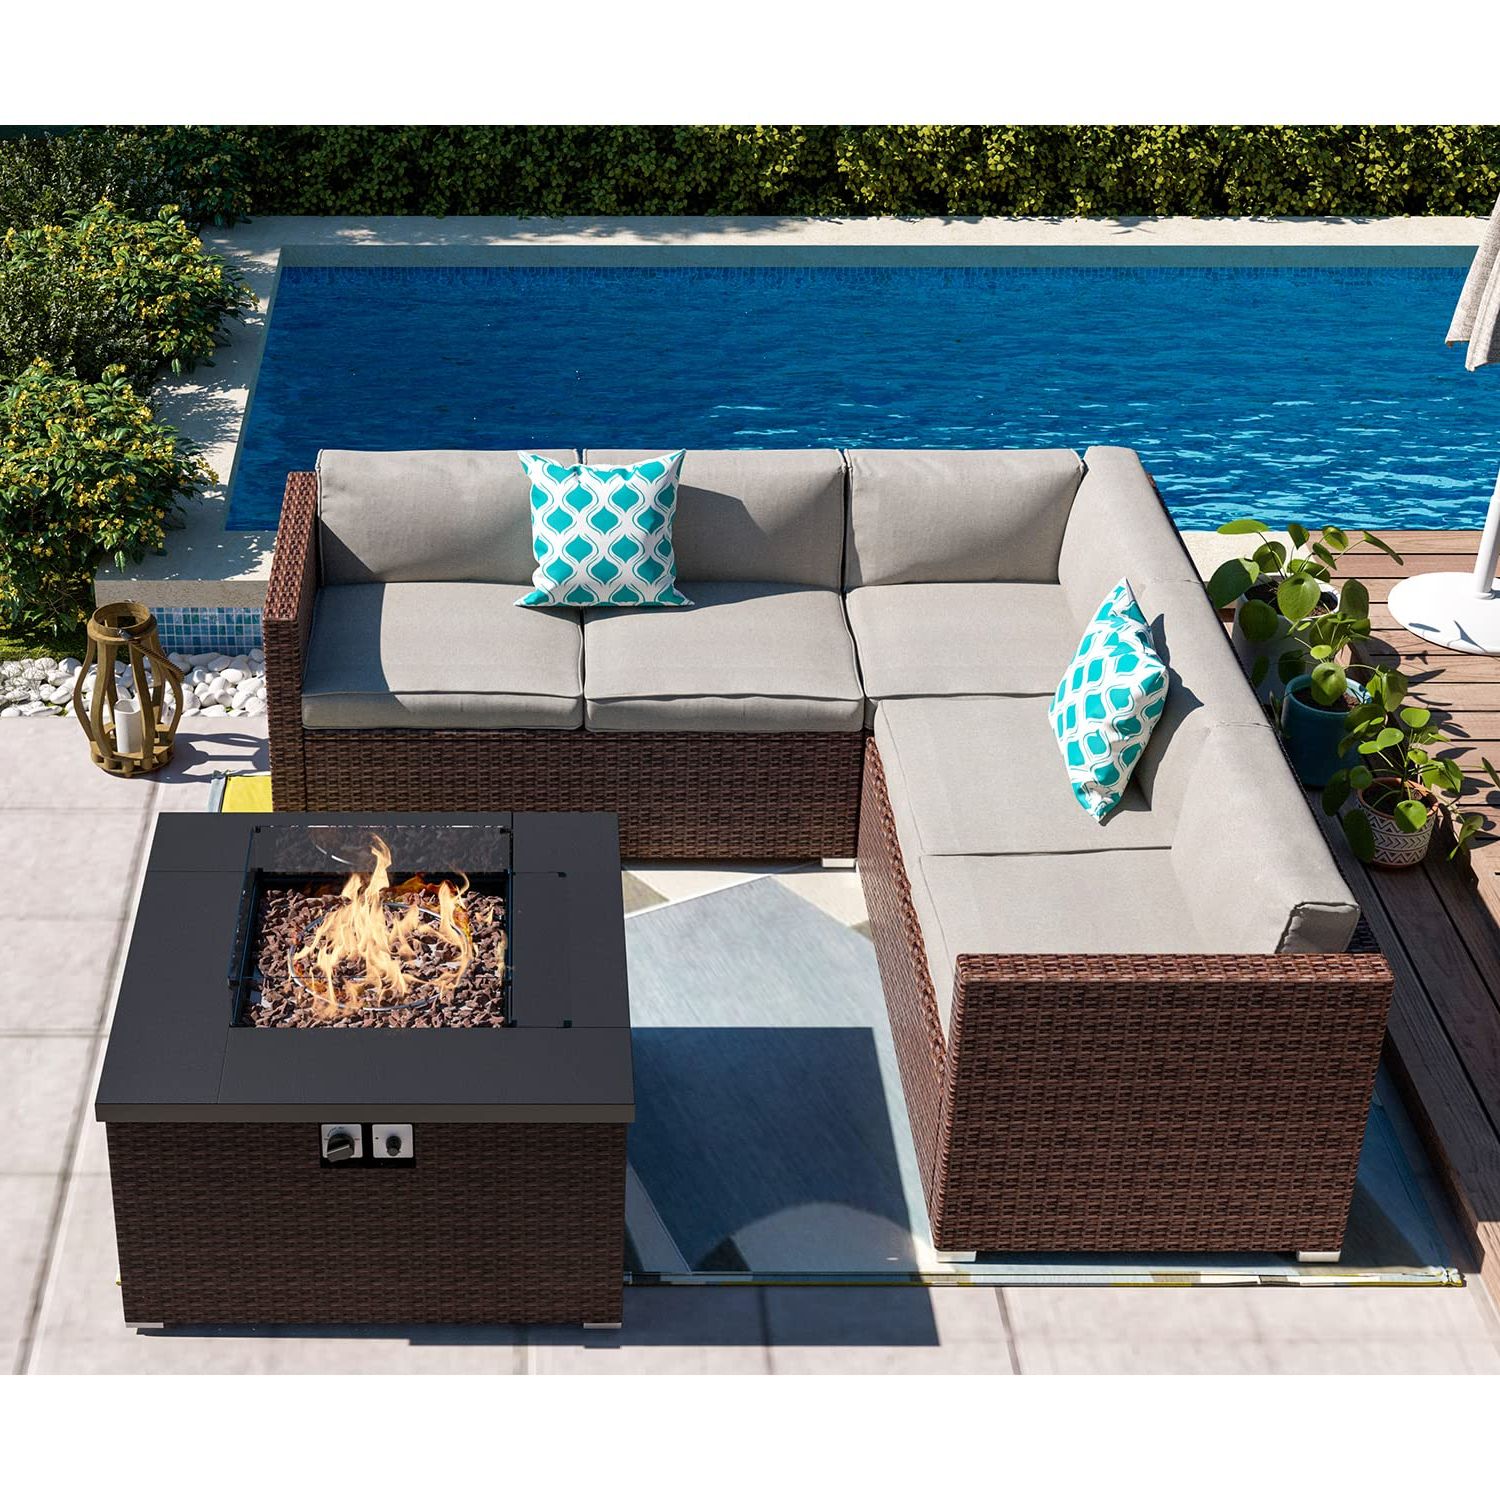 Well Liked Amazon: Hompus Patio Furniture Sectional Sofa W Fire Pit Table,6 Pieces Outdoor  Furniture Set W 32 Inch 40,000 Btu Propane Fire Table W Glass Wind Guard,patio  Conversation Set For Outside,garden,porch,deck : Patio, Lawn For Fire Pit Table Wicker Sectional Sofa Conversation Set (View 2 of 15)